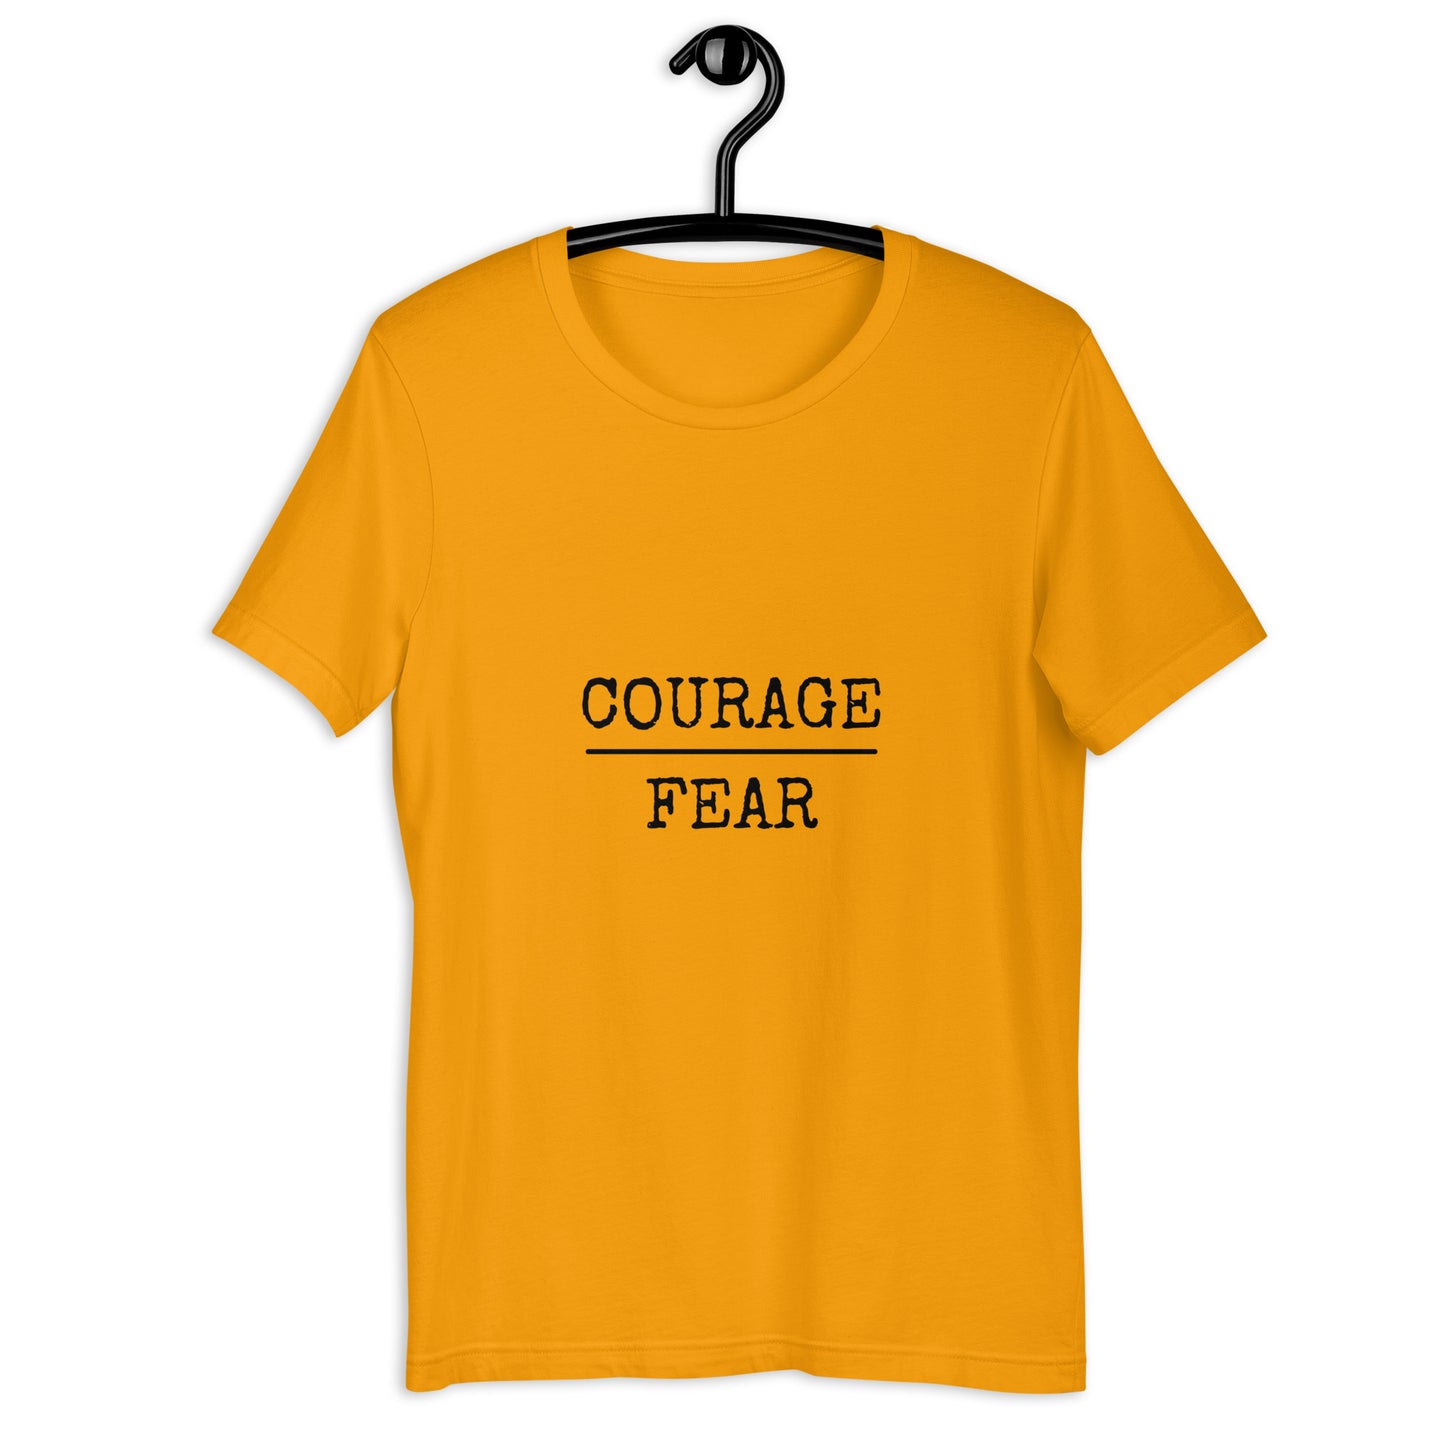 COURAGE/FEAR T-shirt